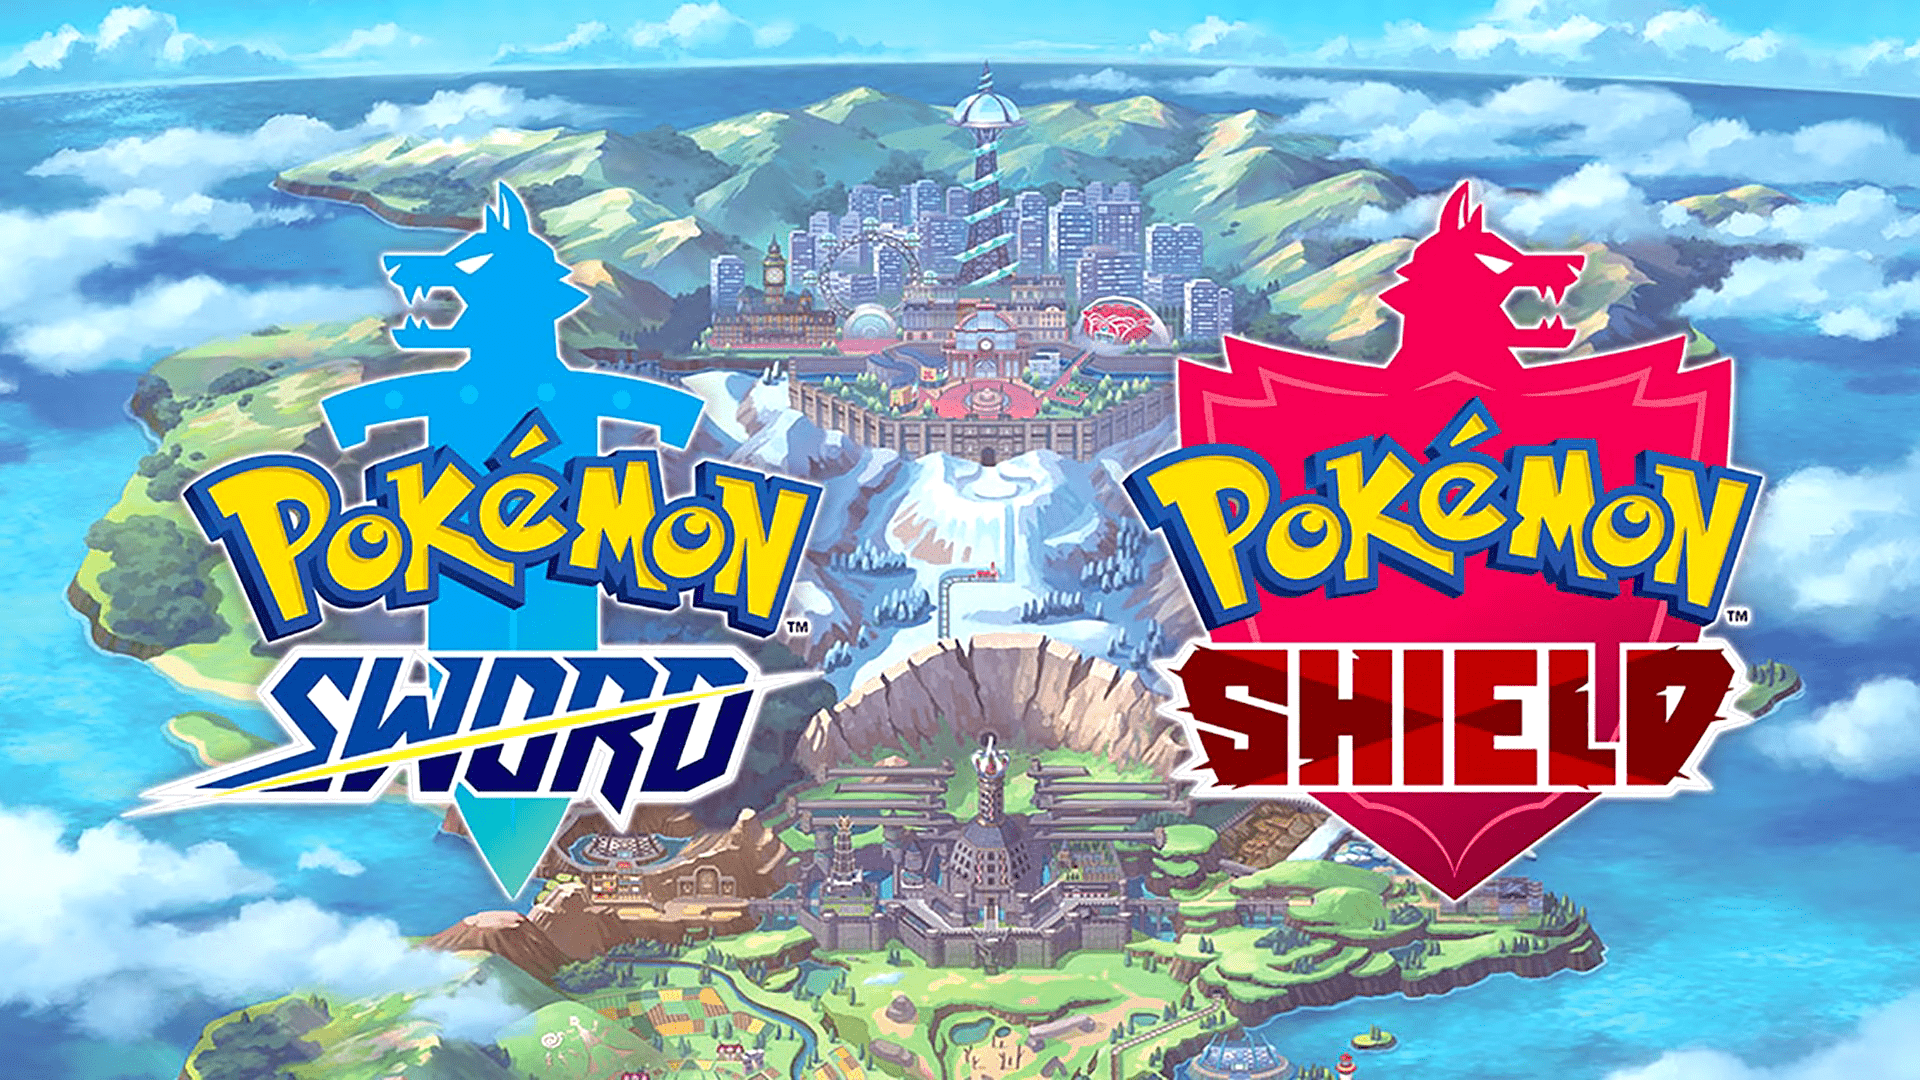 Details About Pokemon Sword & Shield’s Wild Area Have Been Revealed, Fans Are Learning Much More About The Game To Come